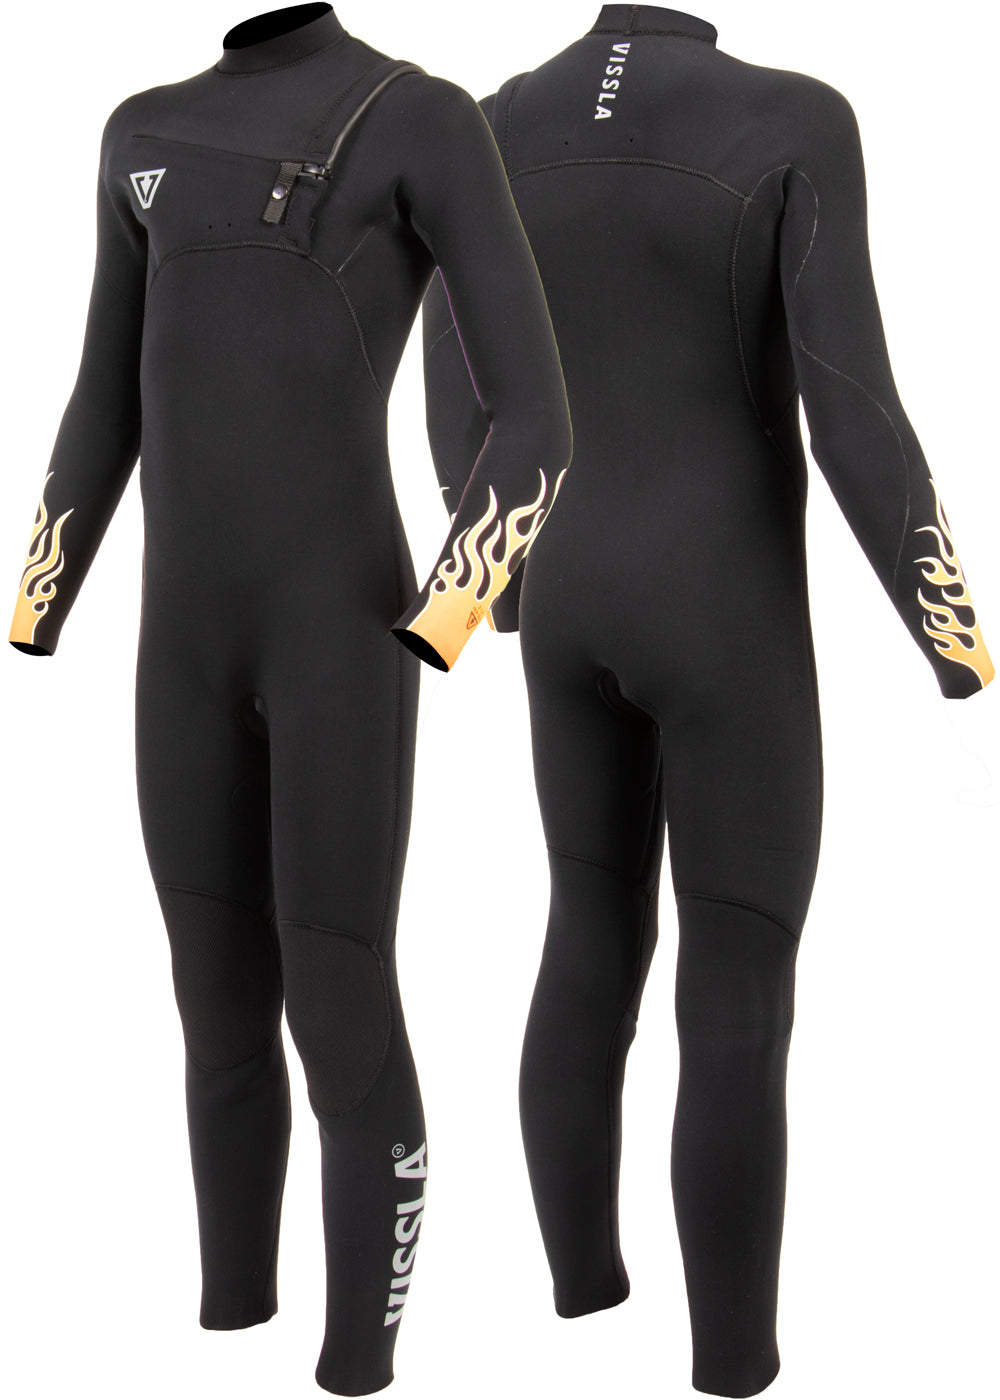 Vissla Black High Seas Boys Fire 4-3 Full Chest Zip Wetsuit. Front and Back View.